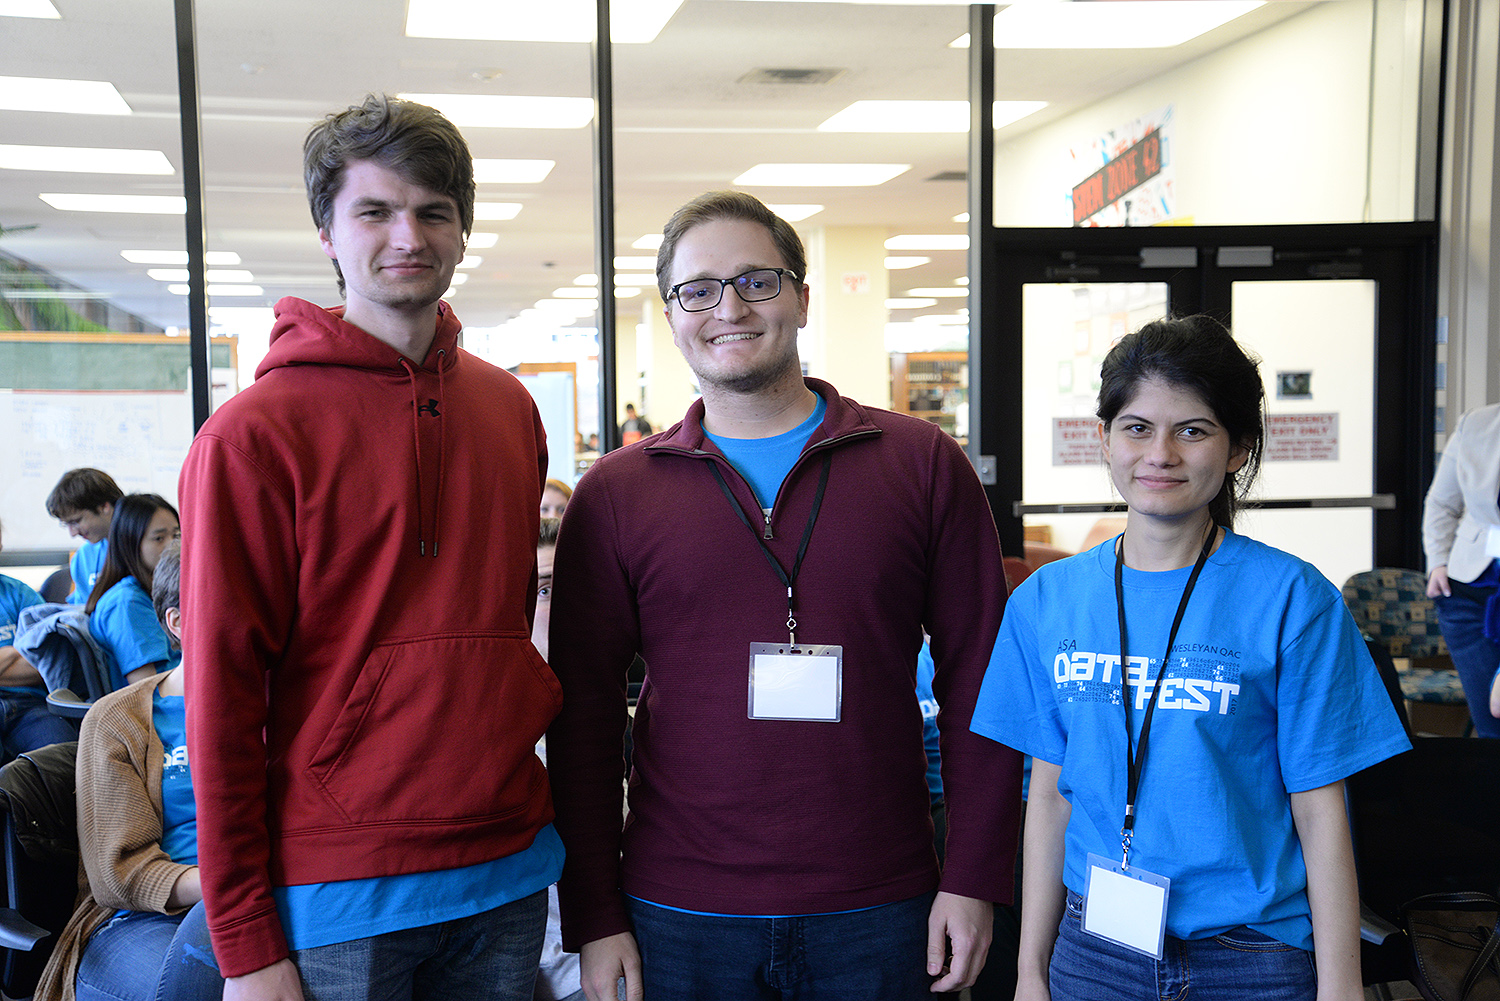 Coup D’ata, a team from Trinity College, took honorable mention with "Best Pattern Detection." Students included Subekshya Bidari, Kalyan Parajuli, Tristan Peirce and Dylan Spagnuolo.